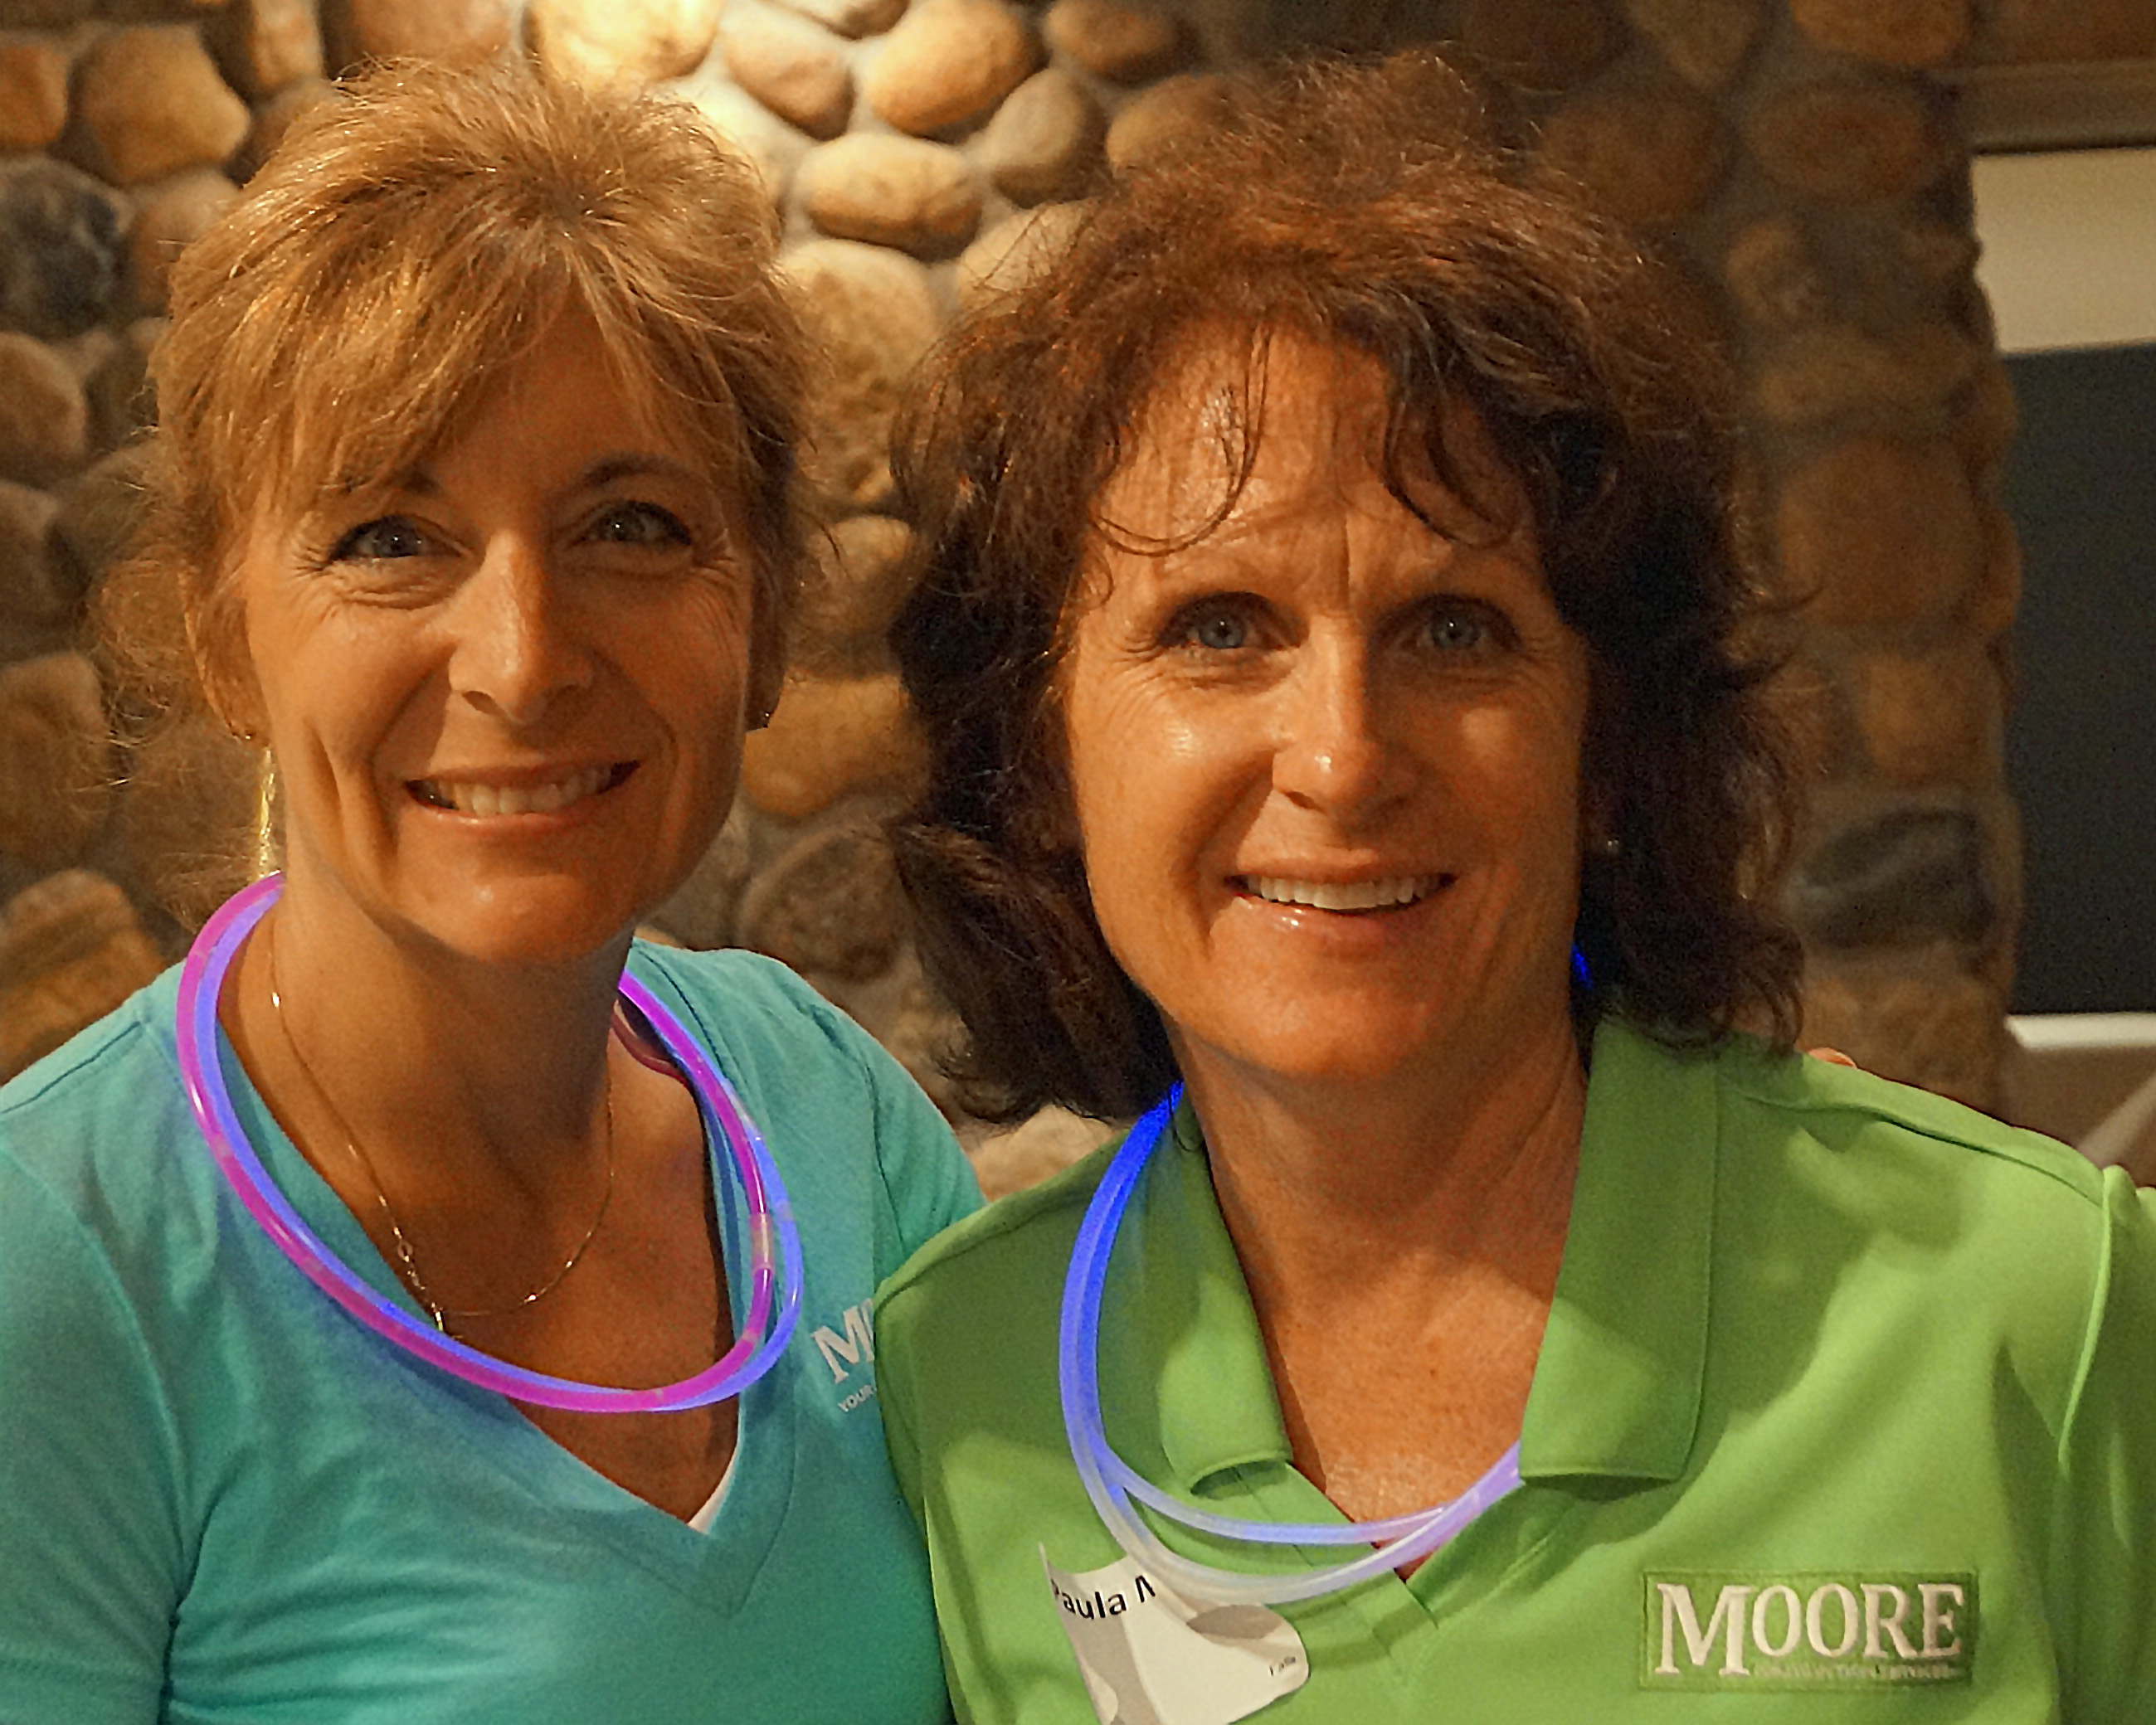 Two women are smiling brightly and wearing glow in the dark necklaces.